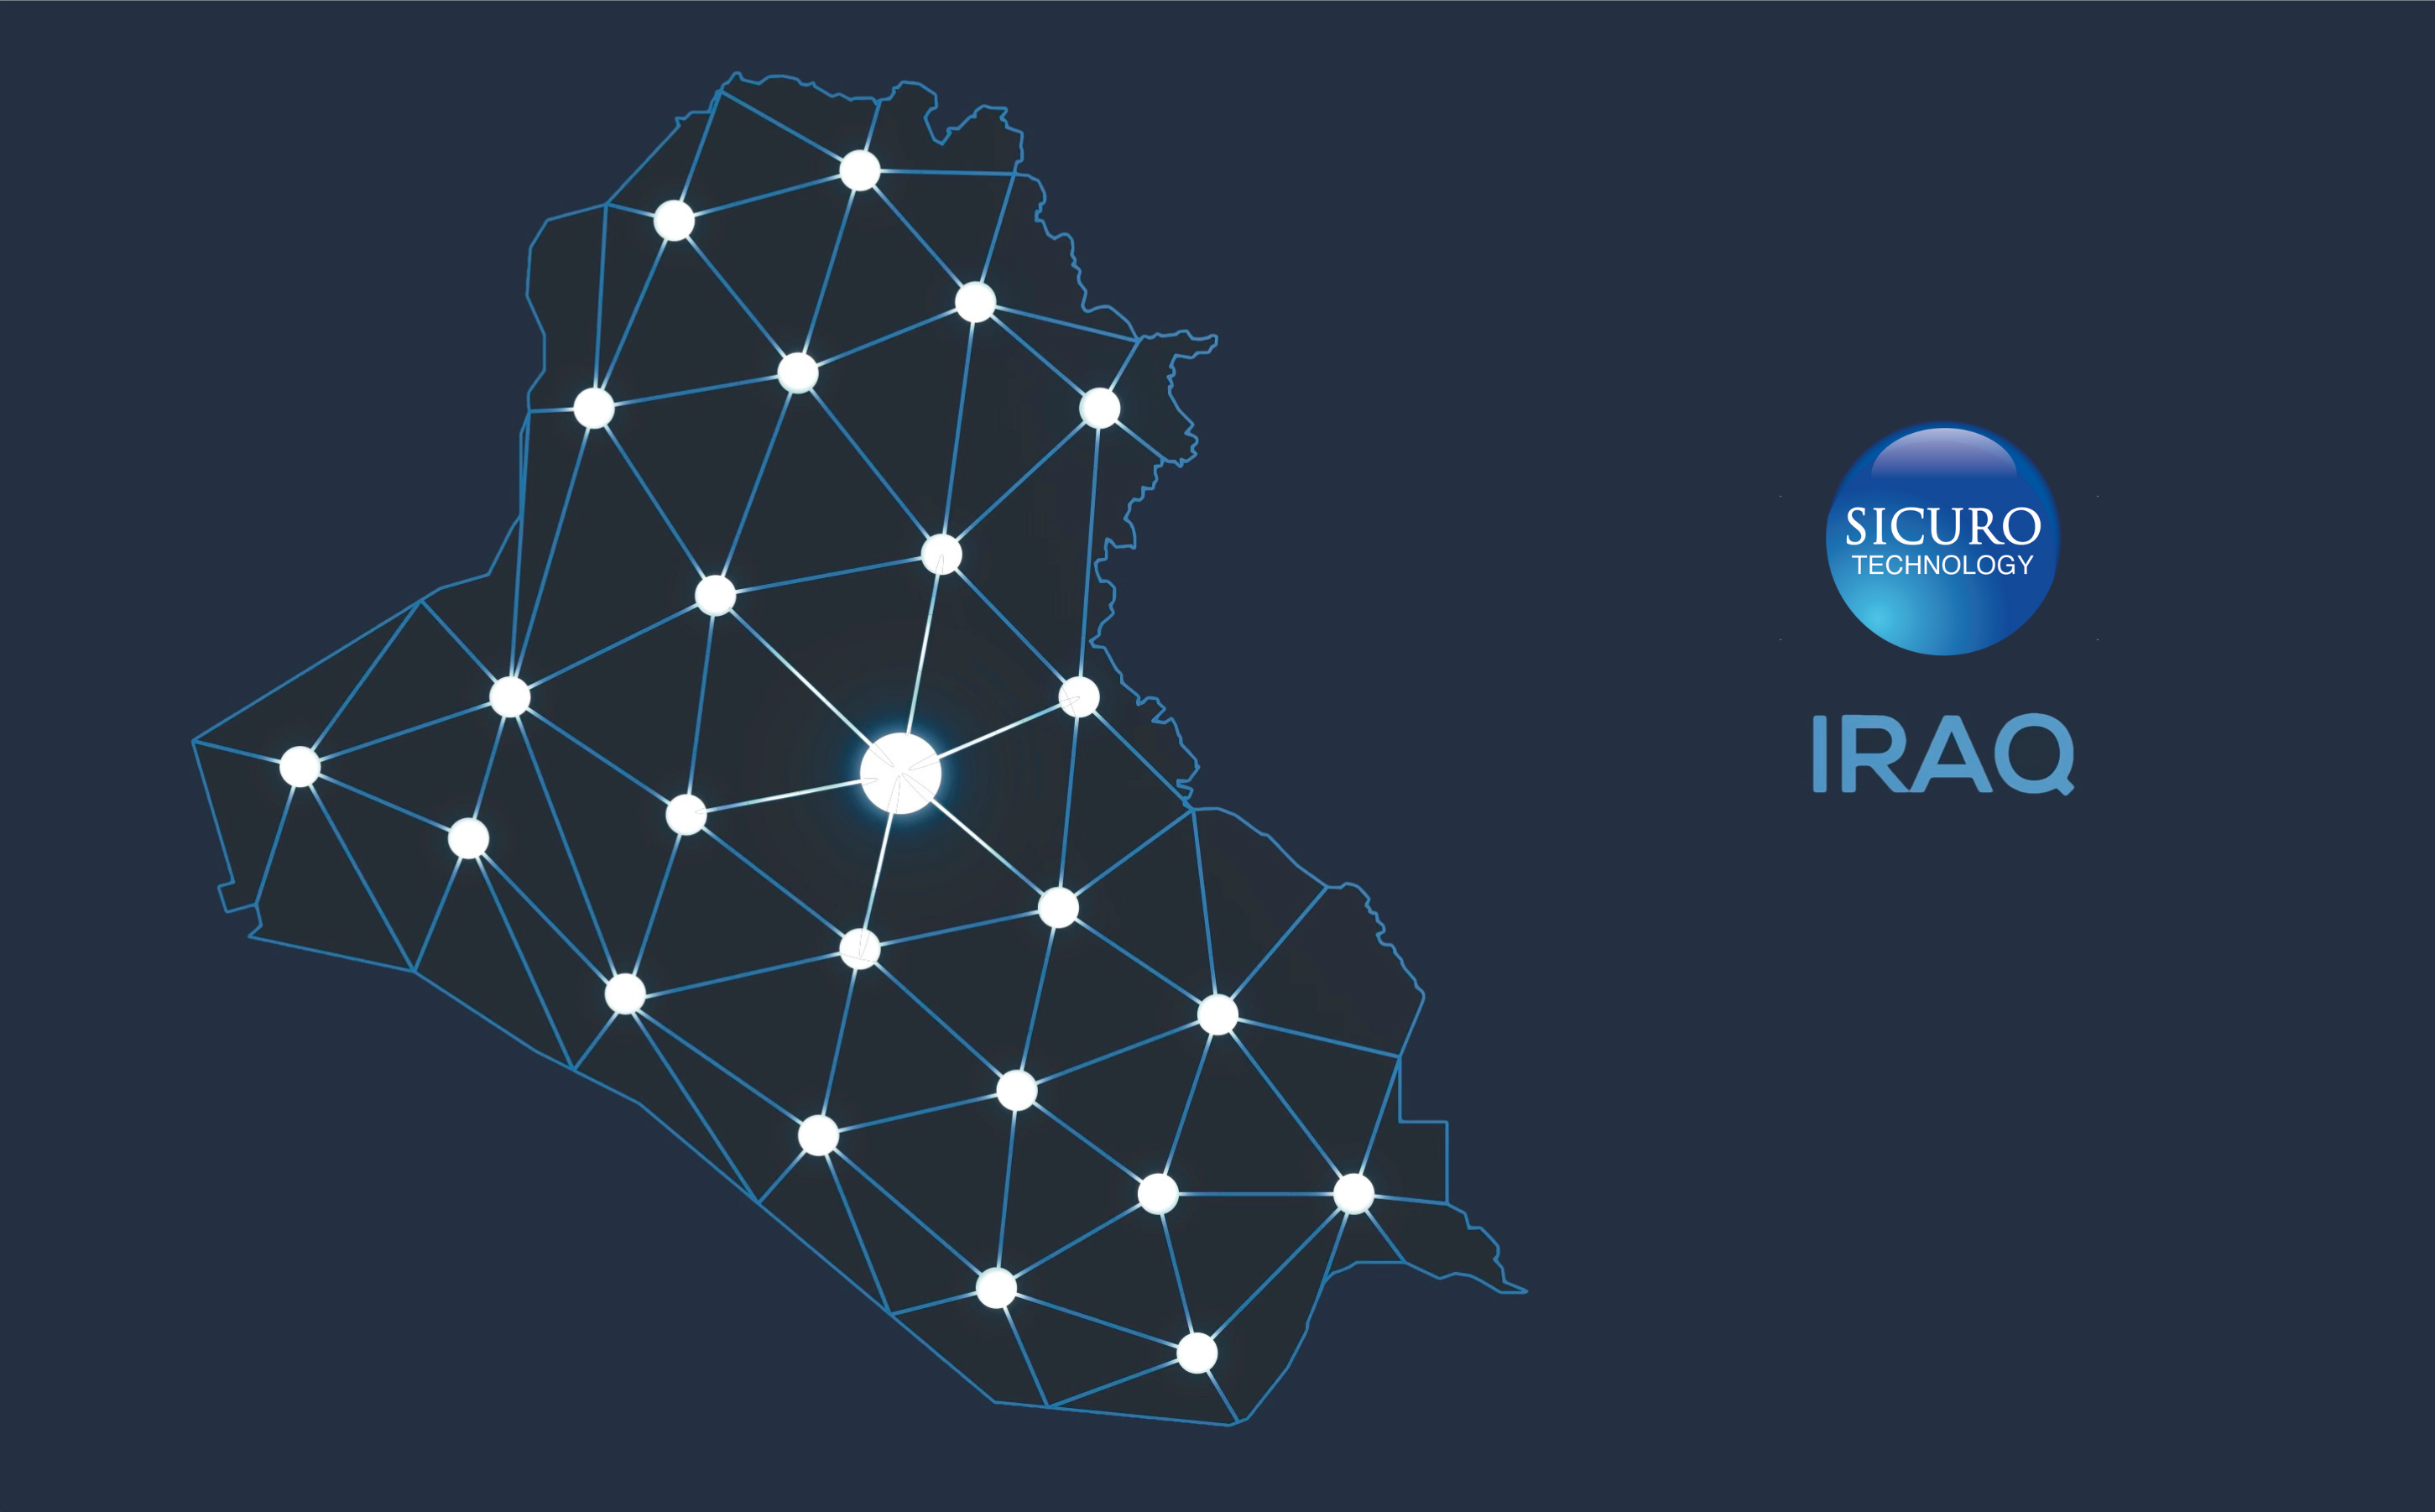 Sicuro Technology sets up dedicated server infrastructure for GPS tracking services in Iraq